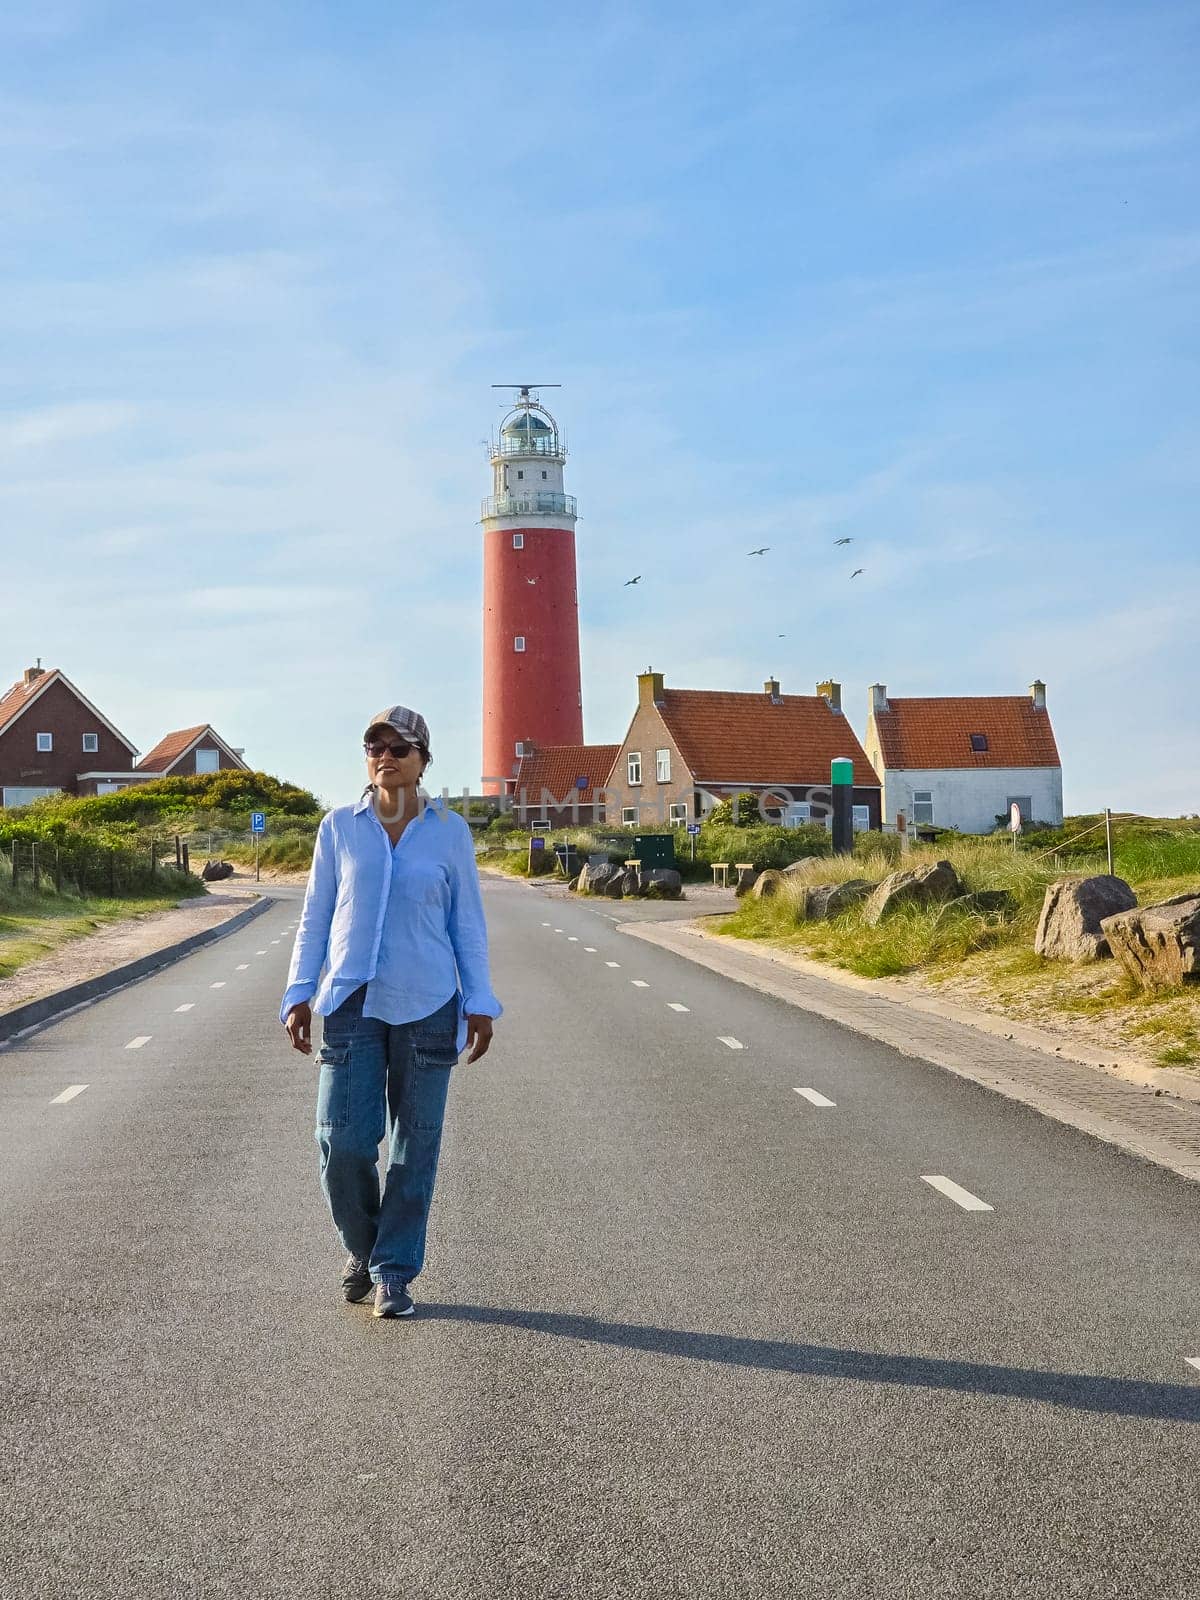 A solitary man walks down a deserted road, with a majestic lighthouse towering in the background, casting a guiding light.